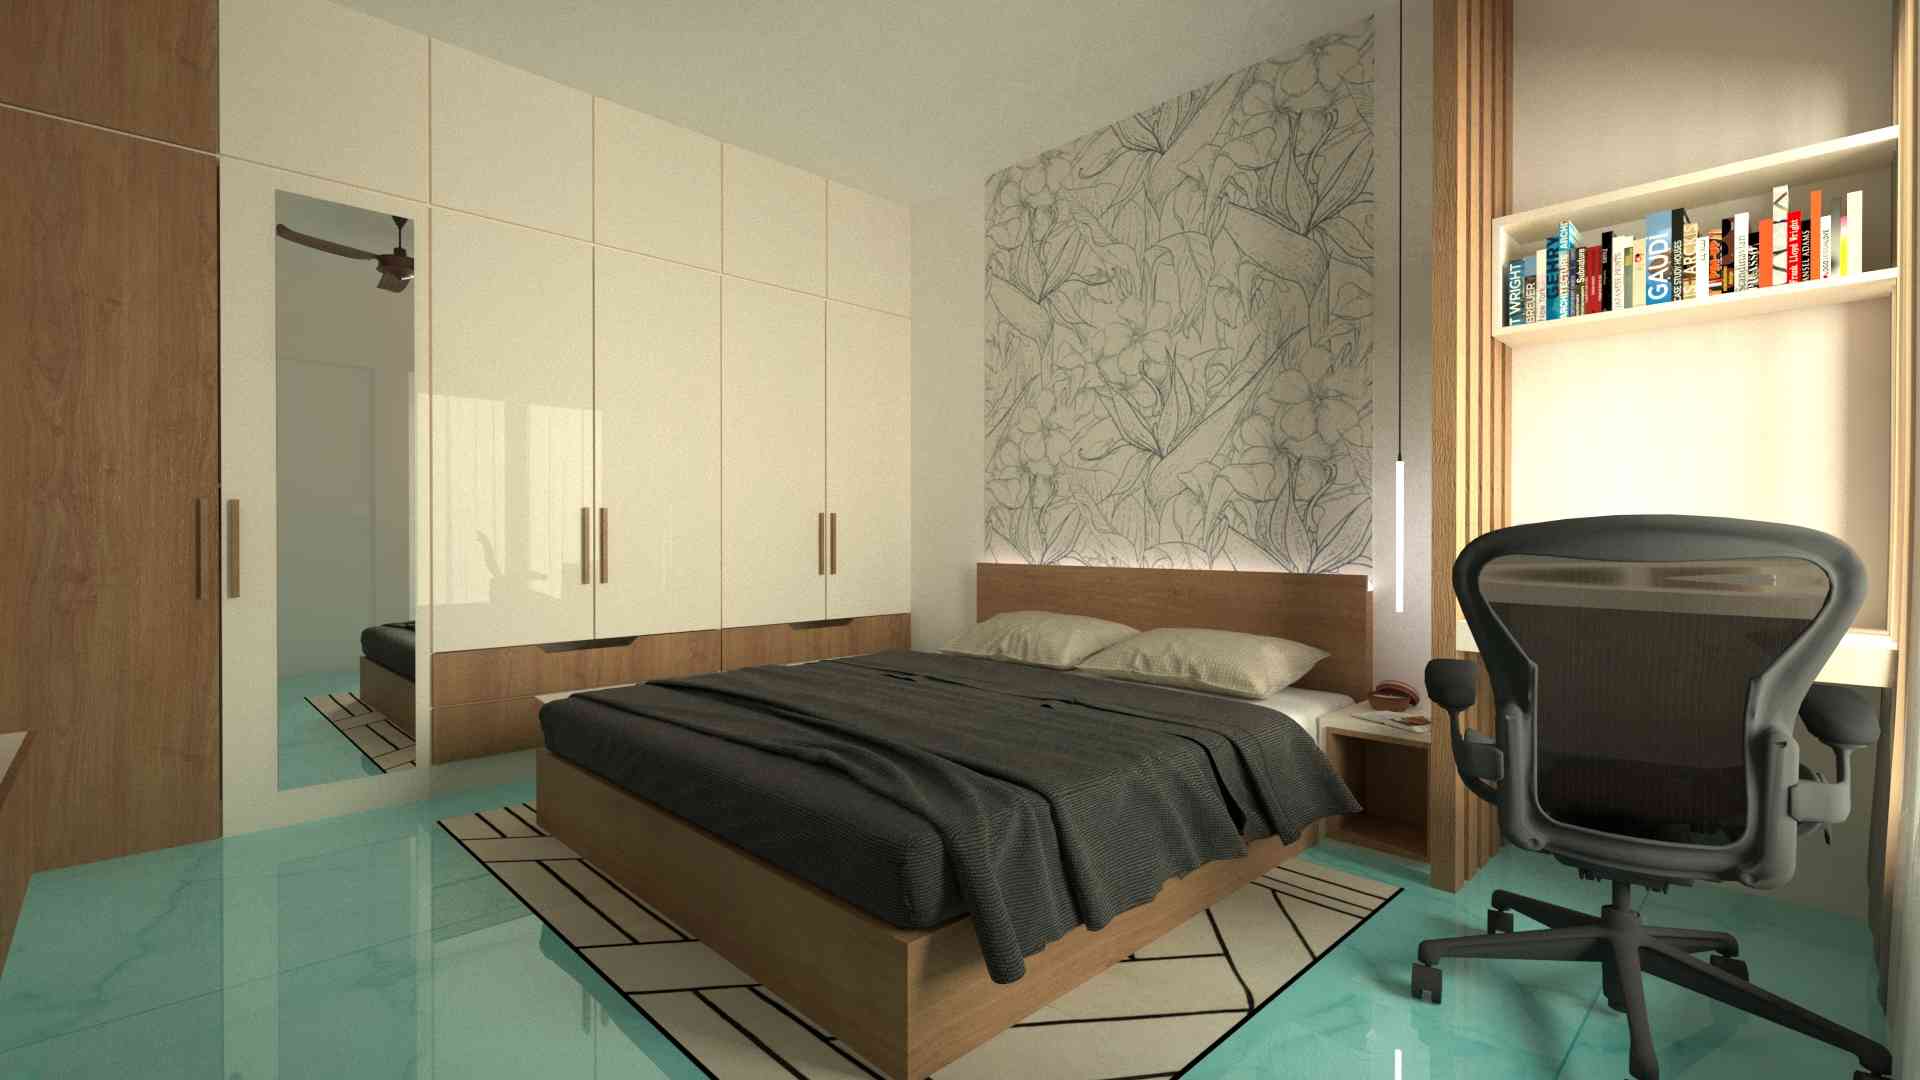 Traditional Master Bedroom Design With Beige Damask Wallpaper And Wooden Furntiture